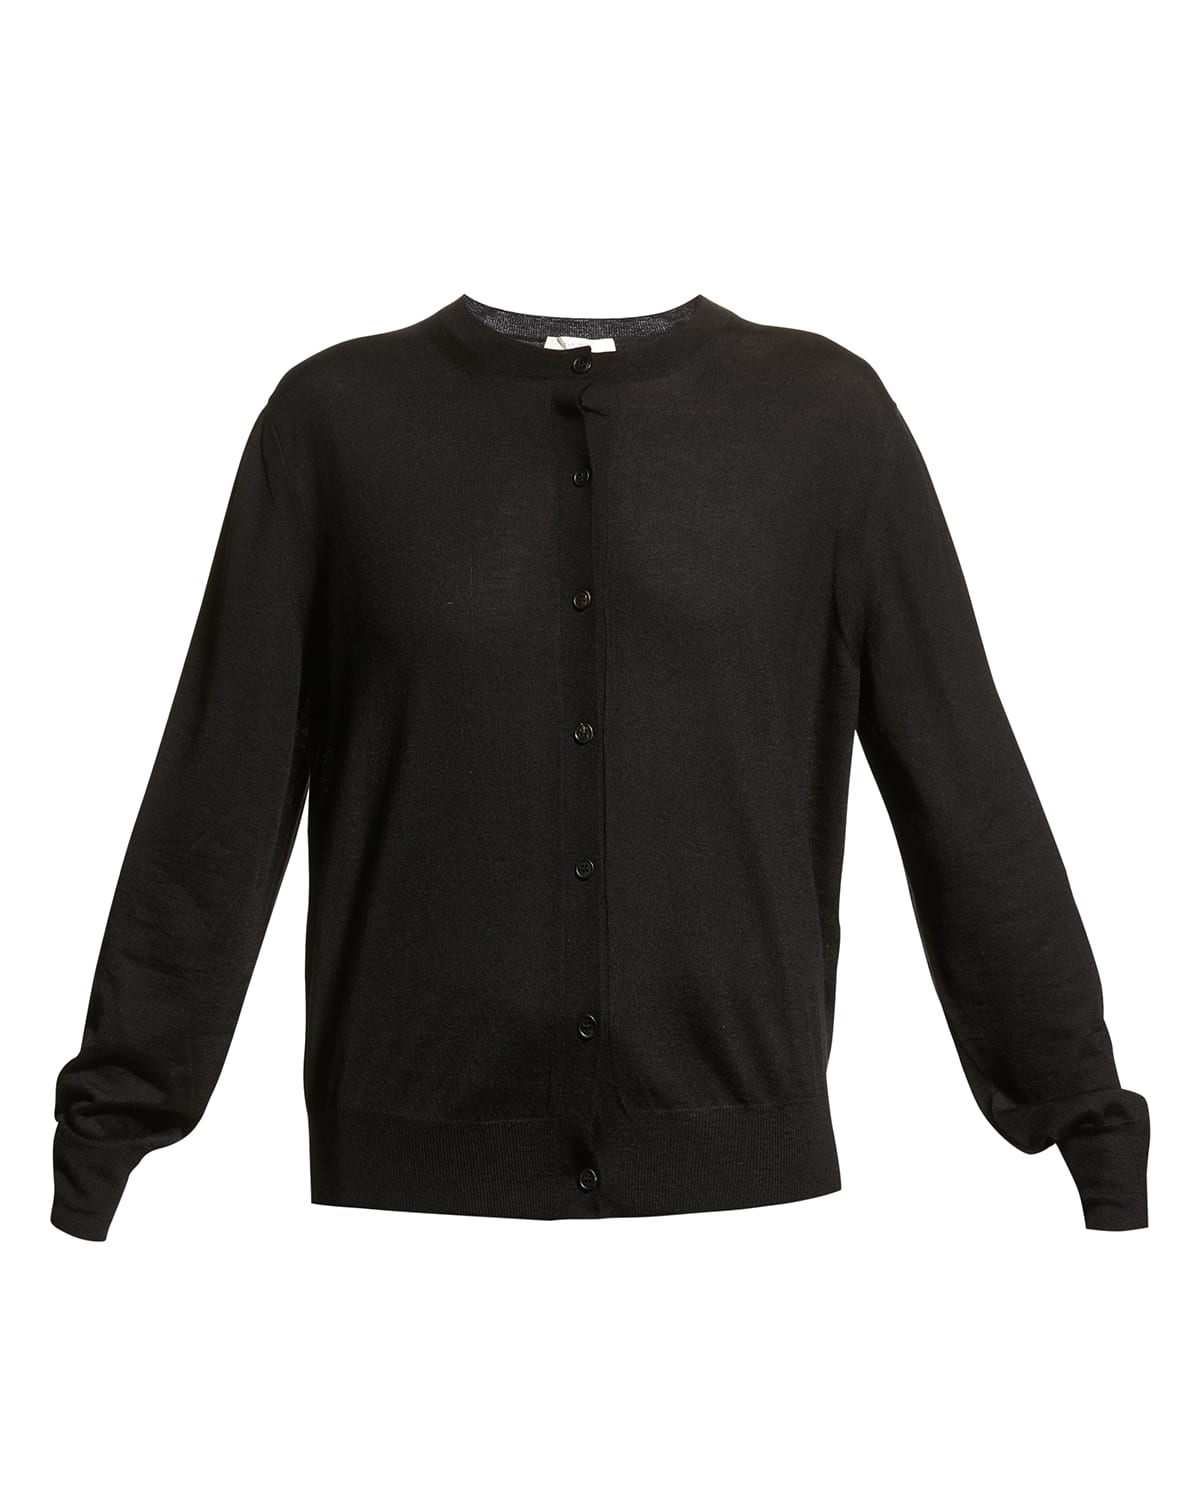 Maison Margiela Wool Cardigan with Embroidered Detail | Neiman Marcus